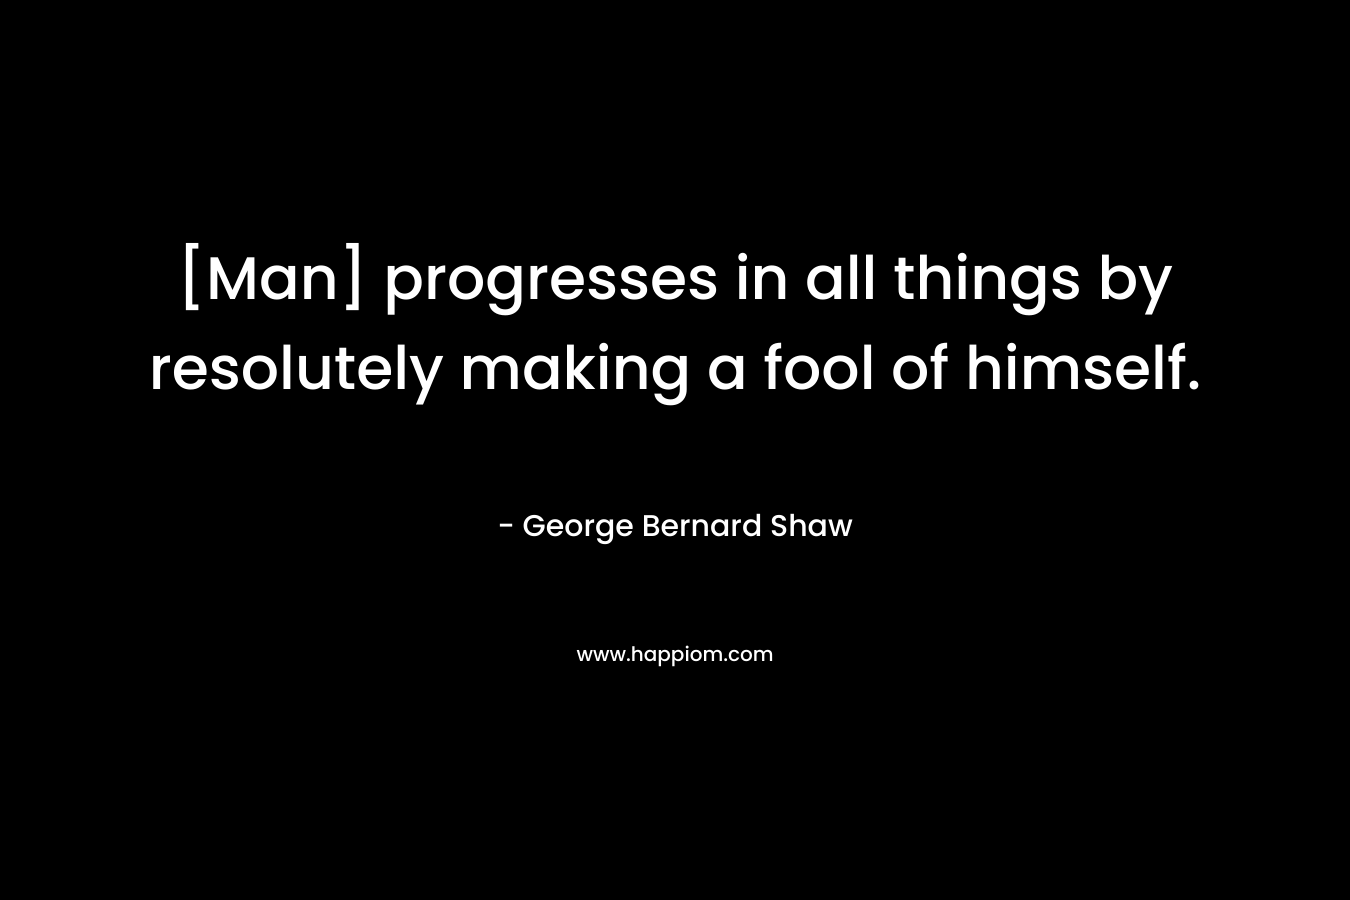 [Man] progresses in all things by resolutely making a fool of himself. – George Bernard Shaw